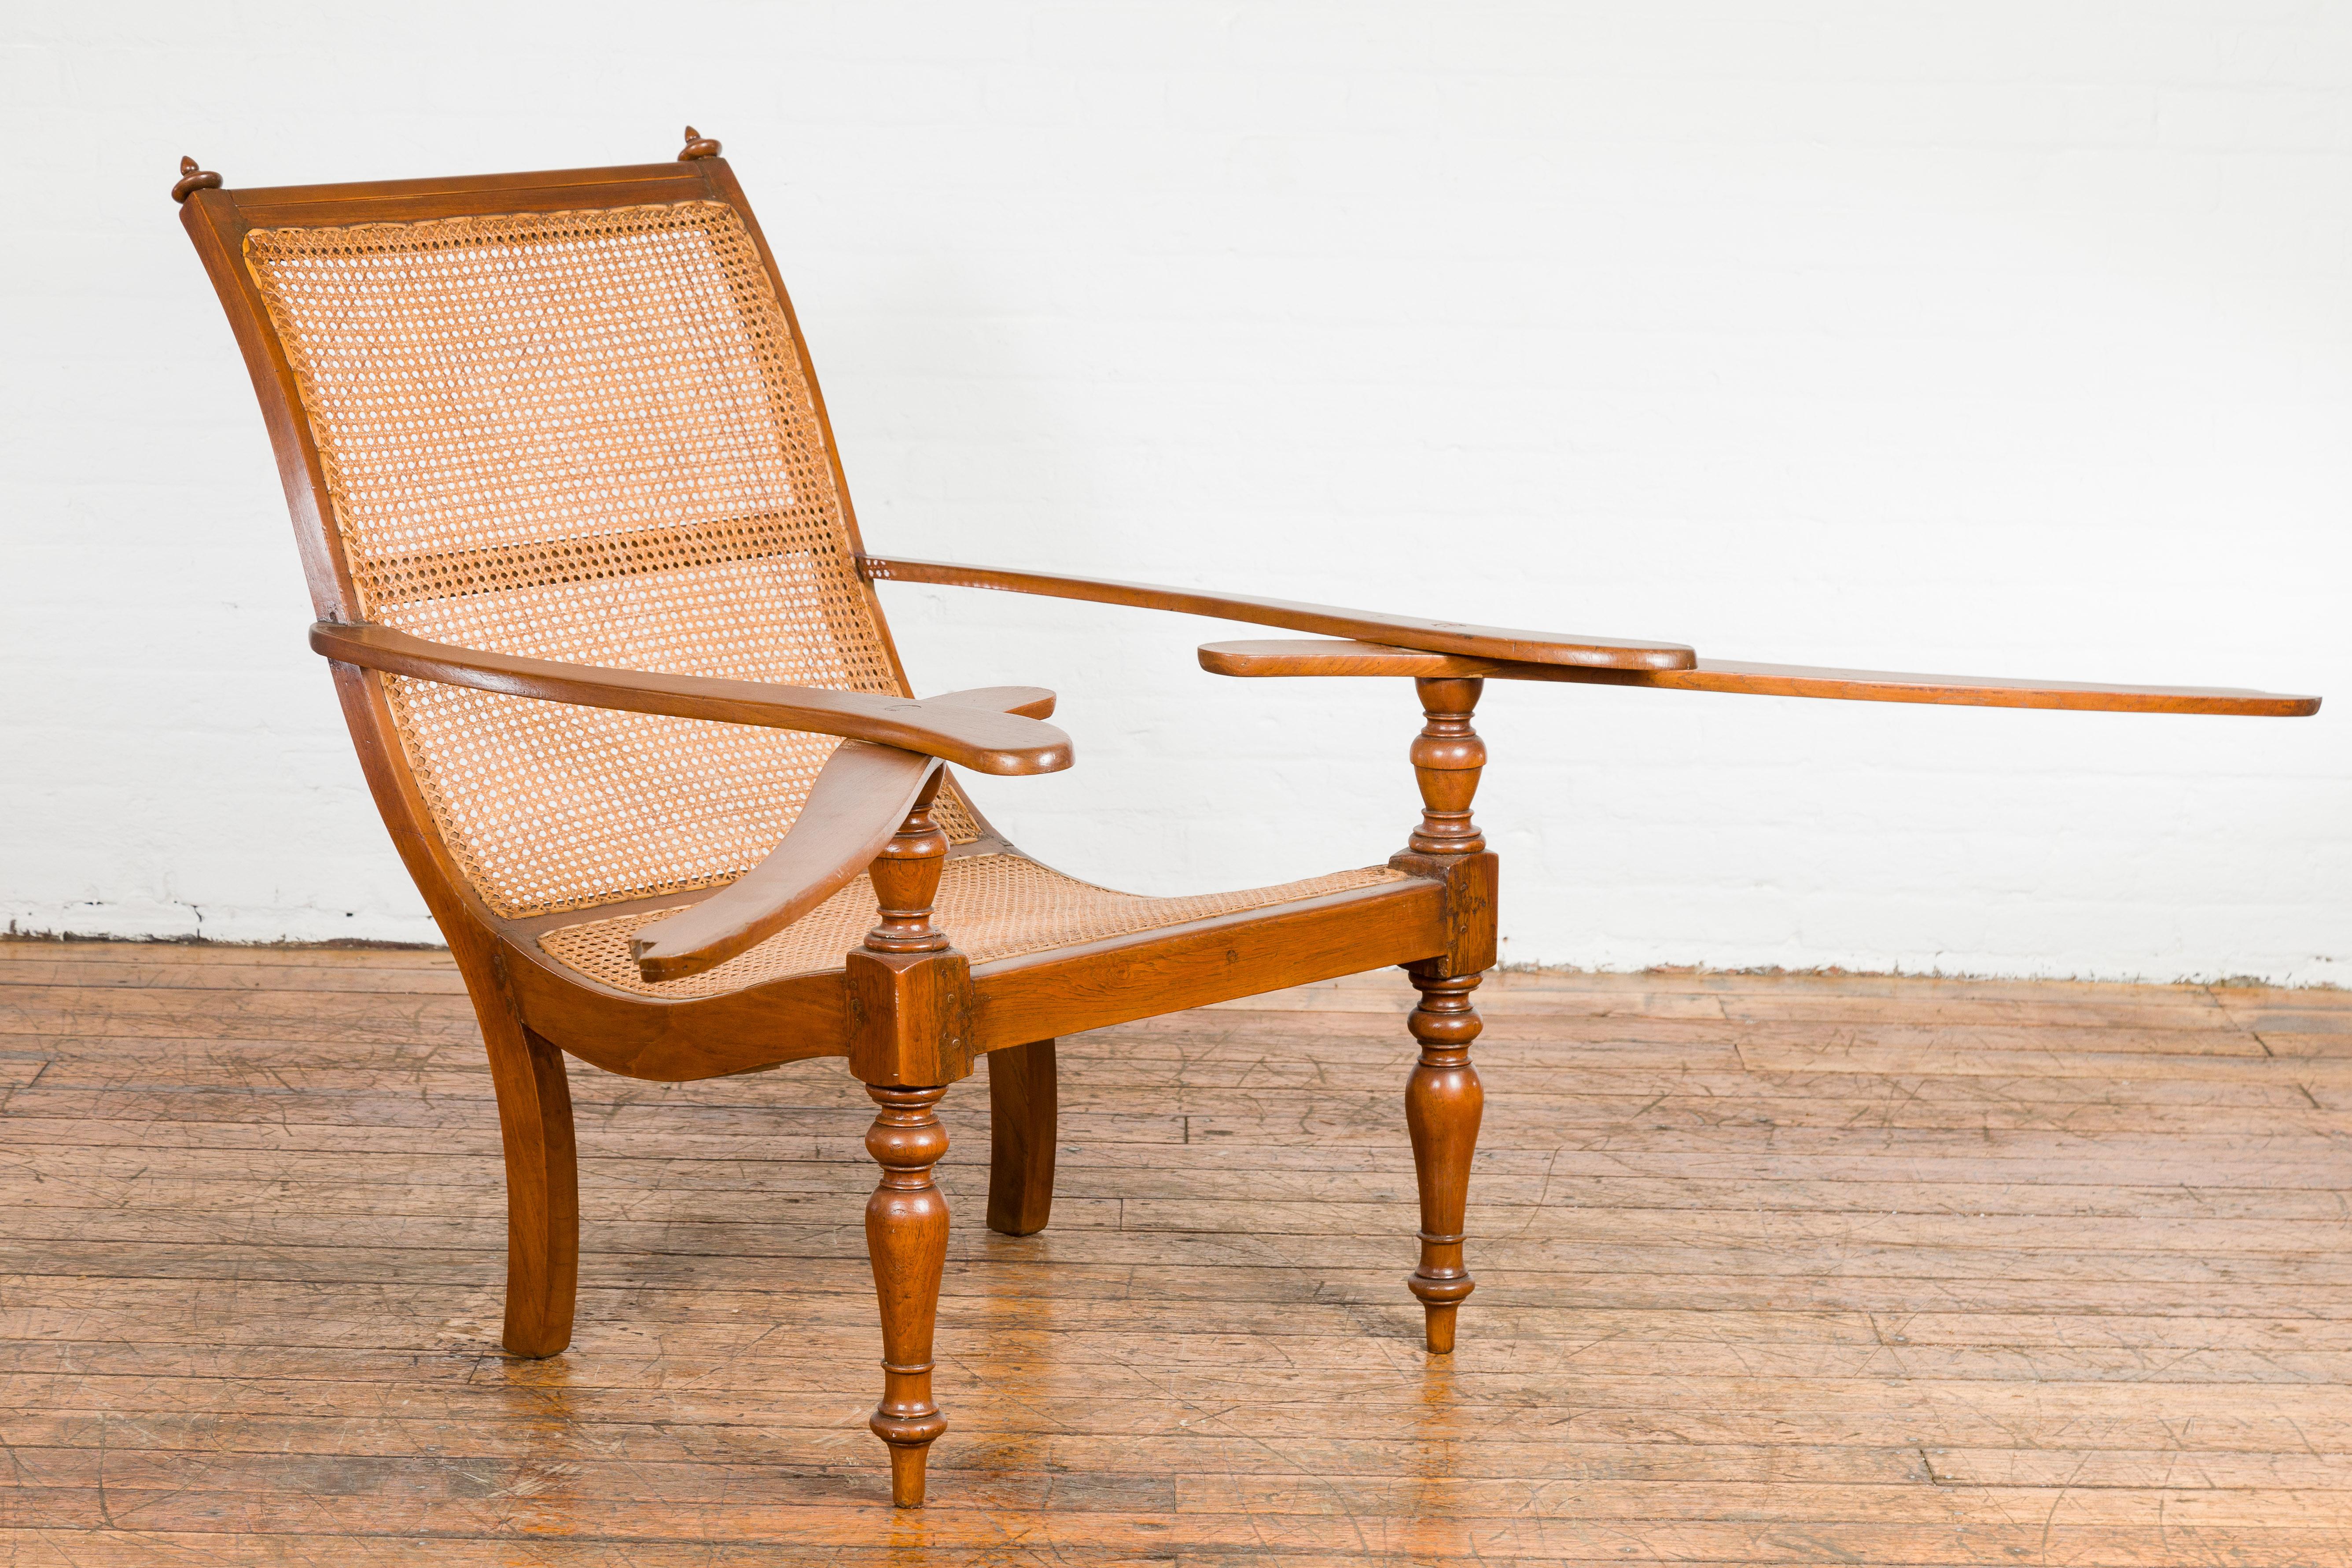 Dutch Colonial Period Wood and Rattan Lounge Chair with Extending Arms In Good Condition For Sale In Yonkers, NY